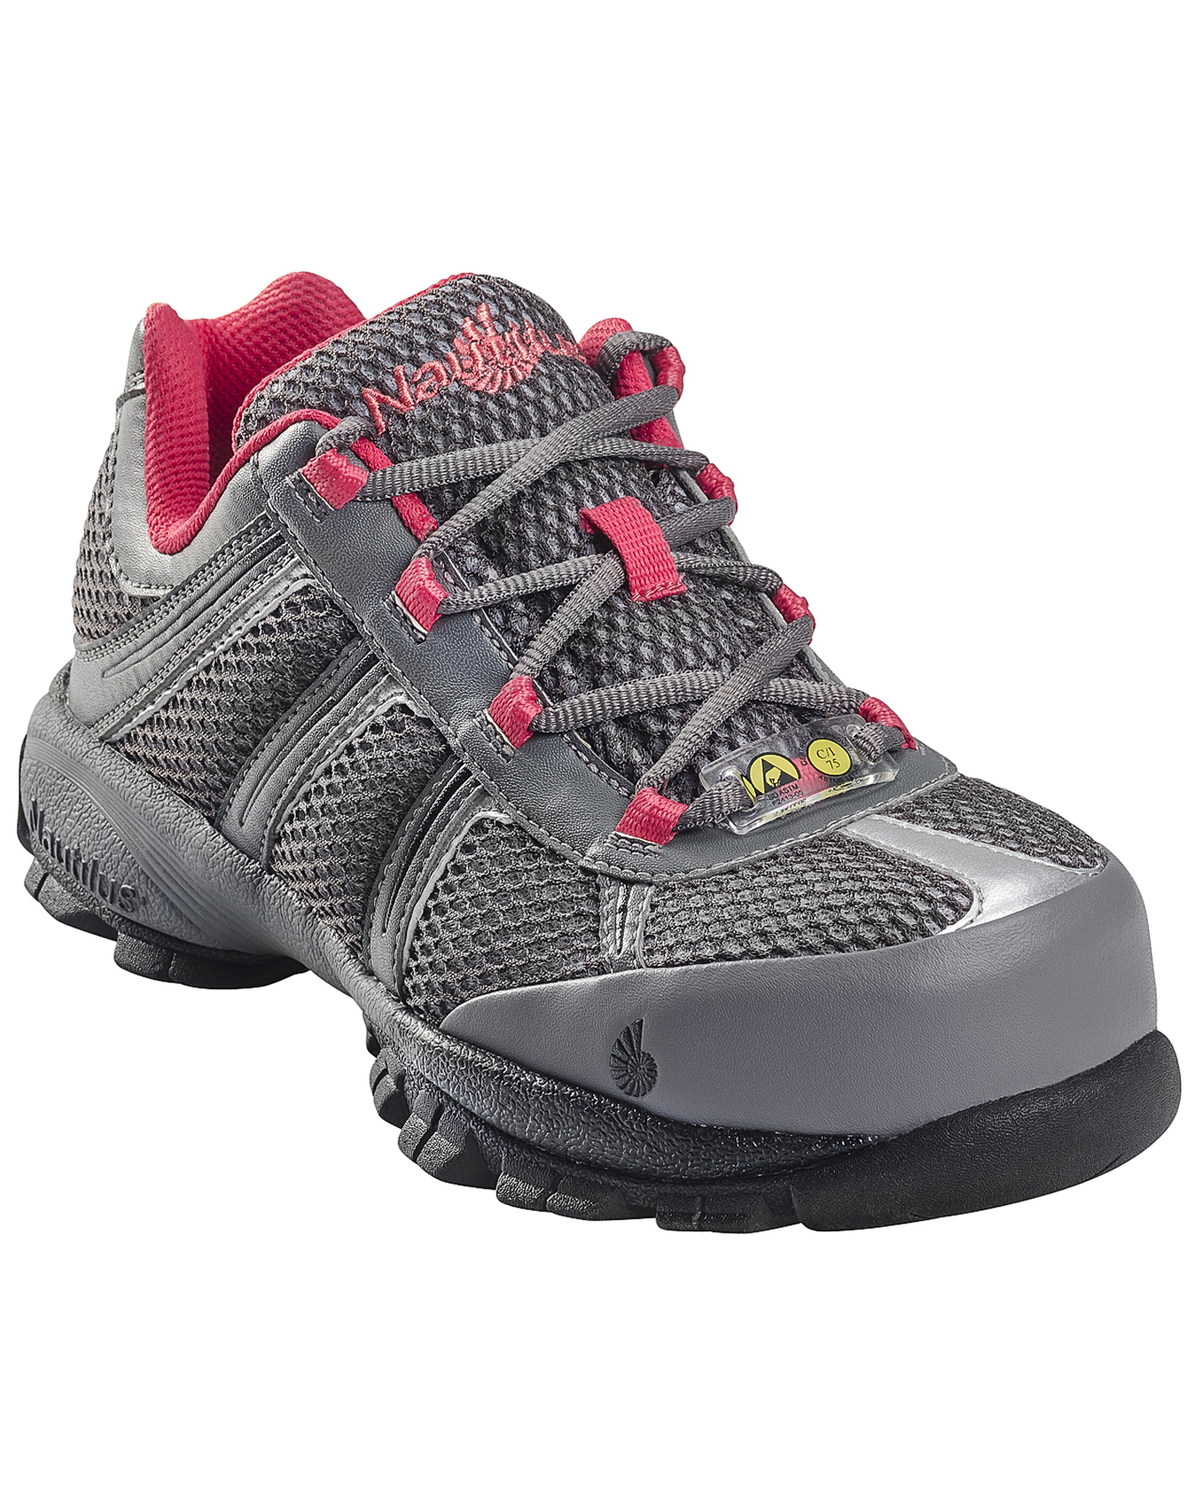 Nautilus Women's Steel Toe ESD Athletic Safety Shoes